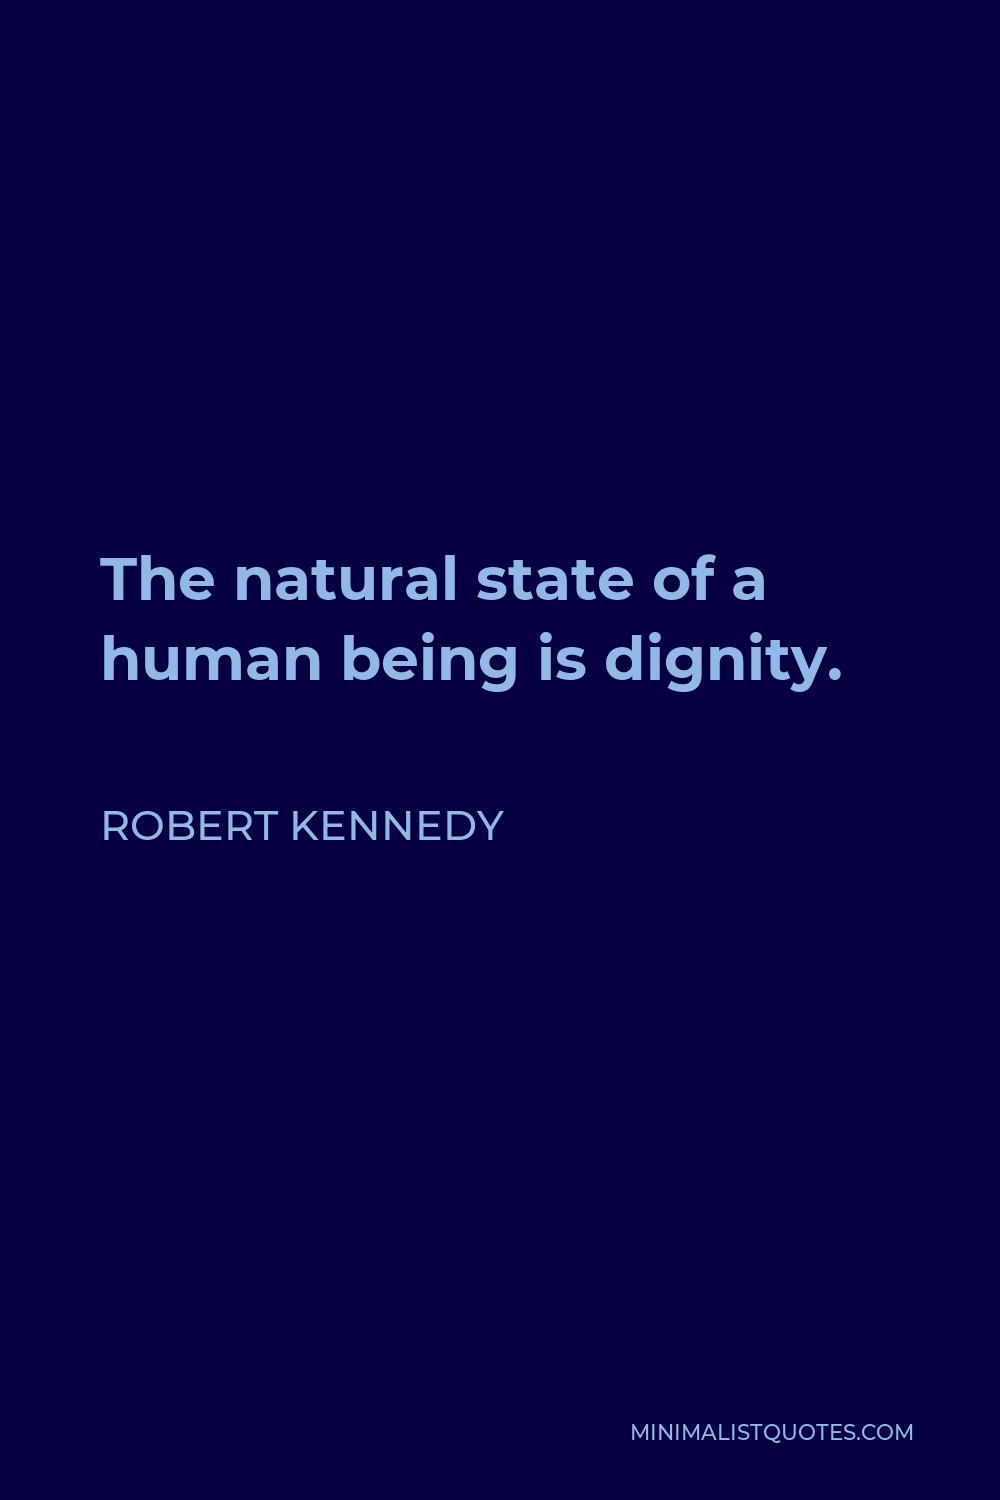 Robert Kennedy Quote - The natural state of a human being is dignity.